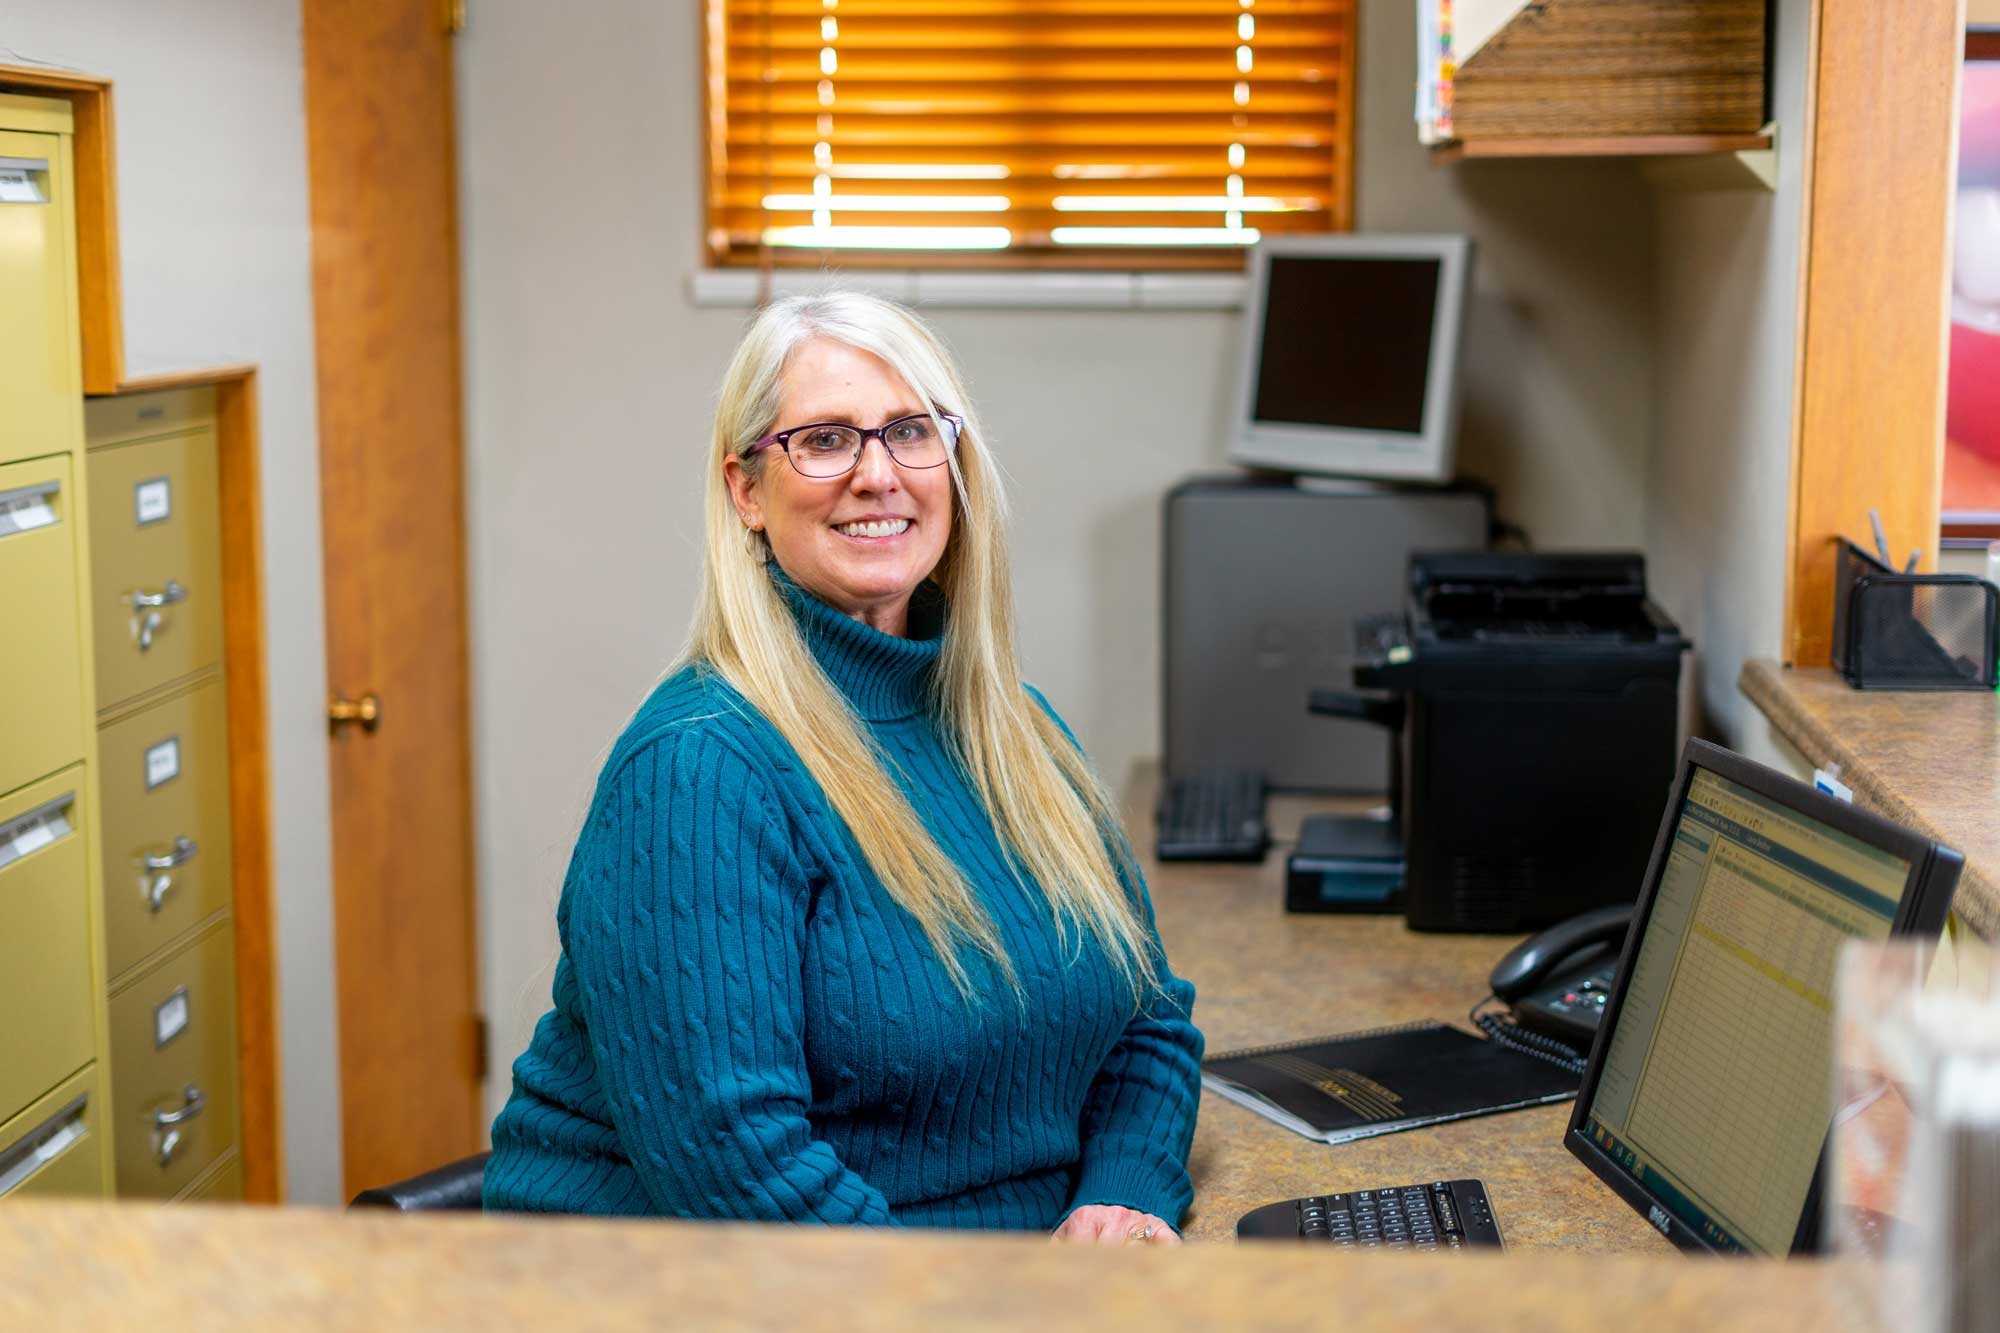 photo of Theresa - Mike Ryan DDS receptionist - Grand Junction dentist